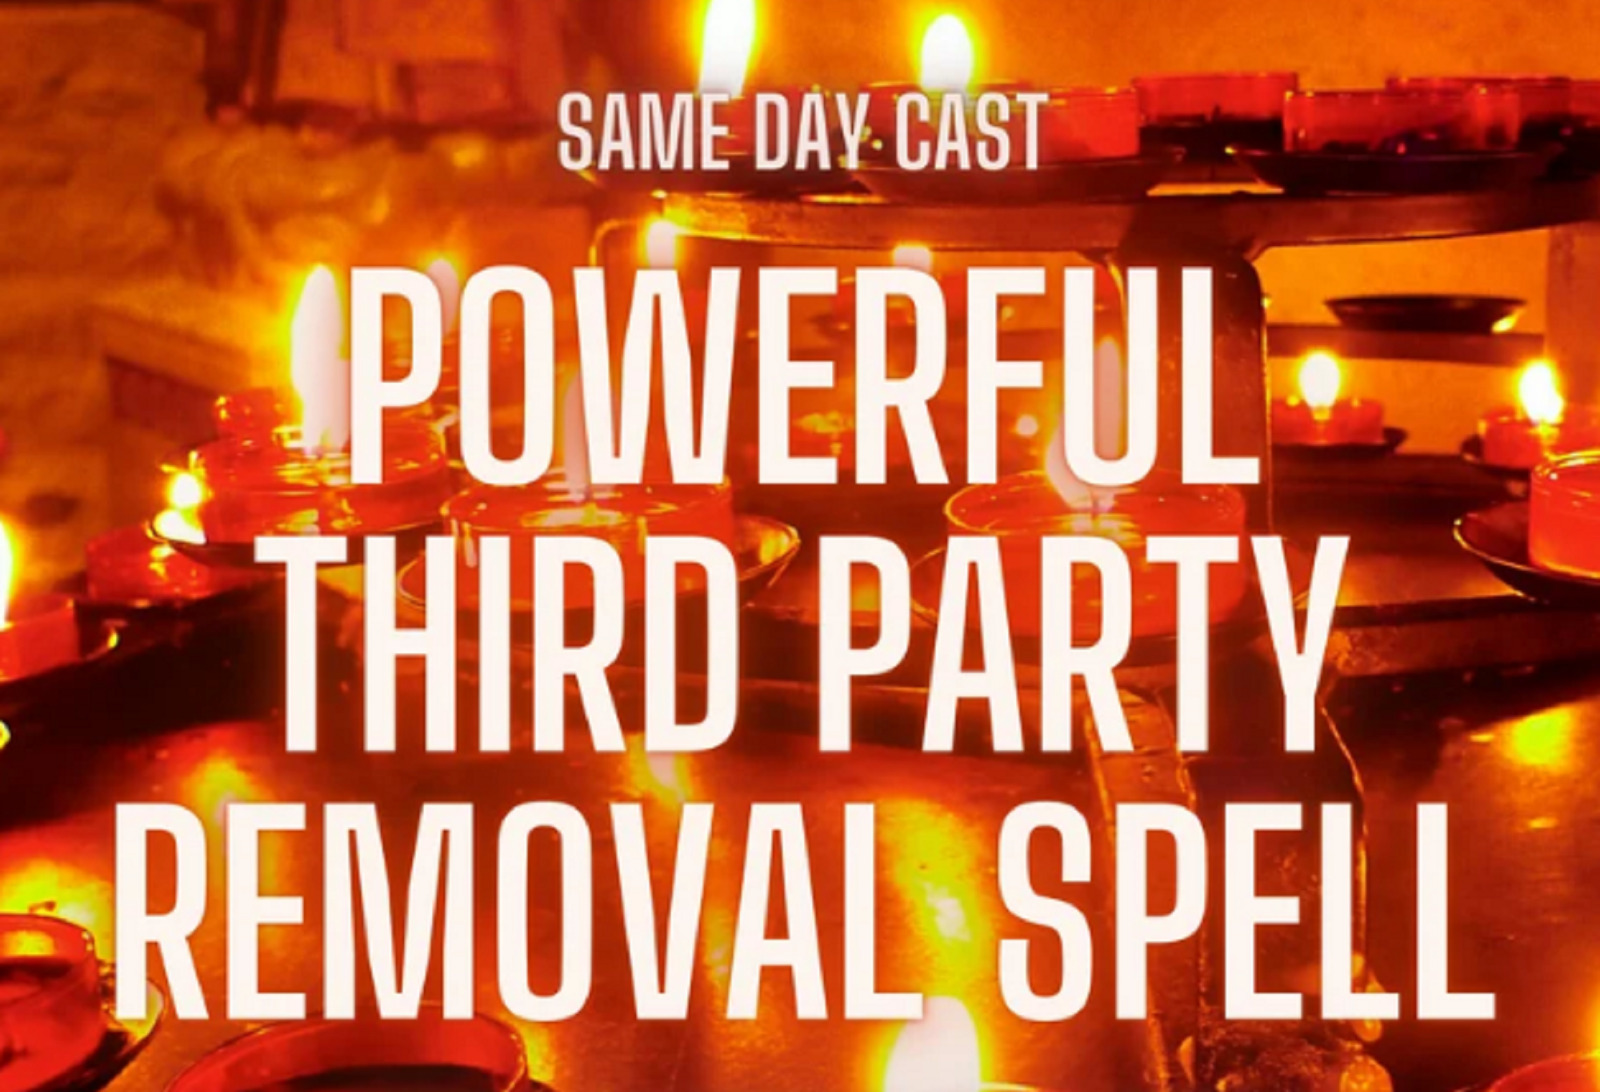 Powerful Third Party Removal Spell Banish Third Party Relationship Love Spell Sa